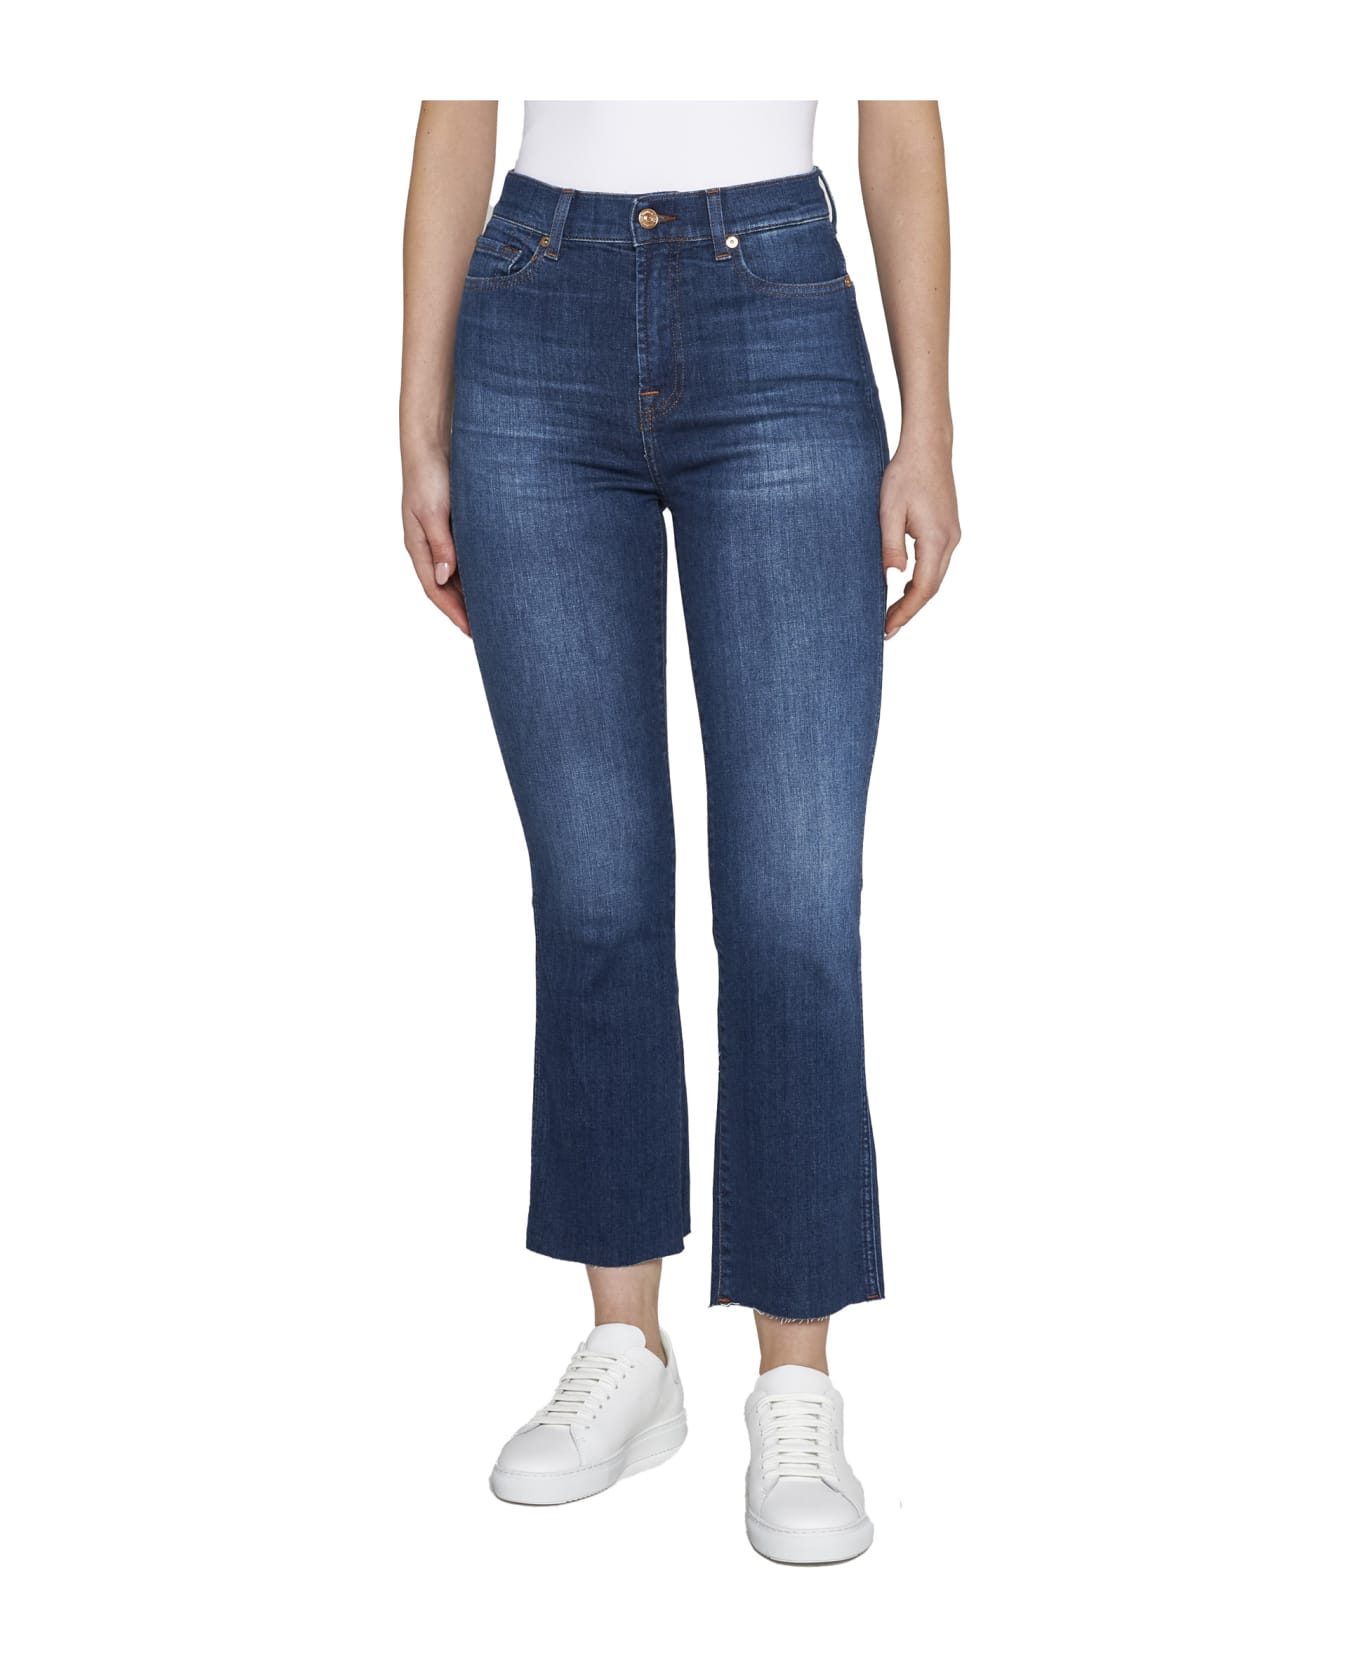 7 For All Mankind Jeans - DENIM BLUE